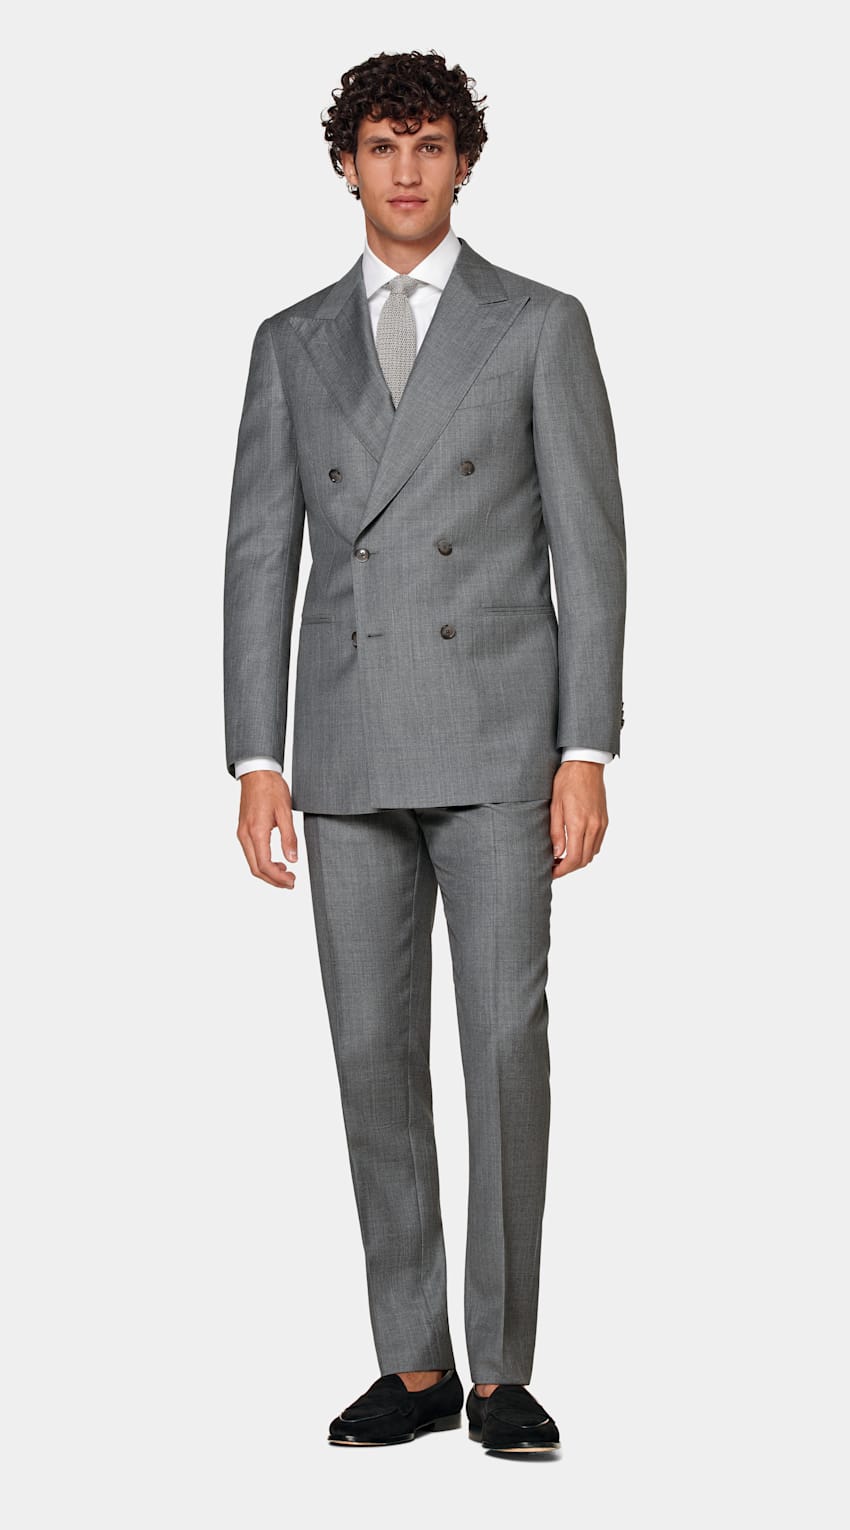 SUITSUPPLY Pure S110's Wool by Vitale Barberis Canonico, Italy Light Grey Havana Suit